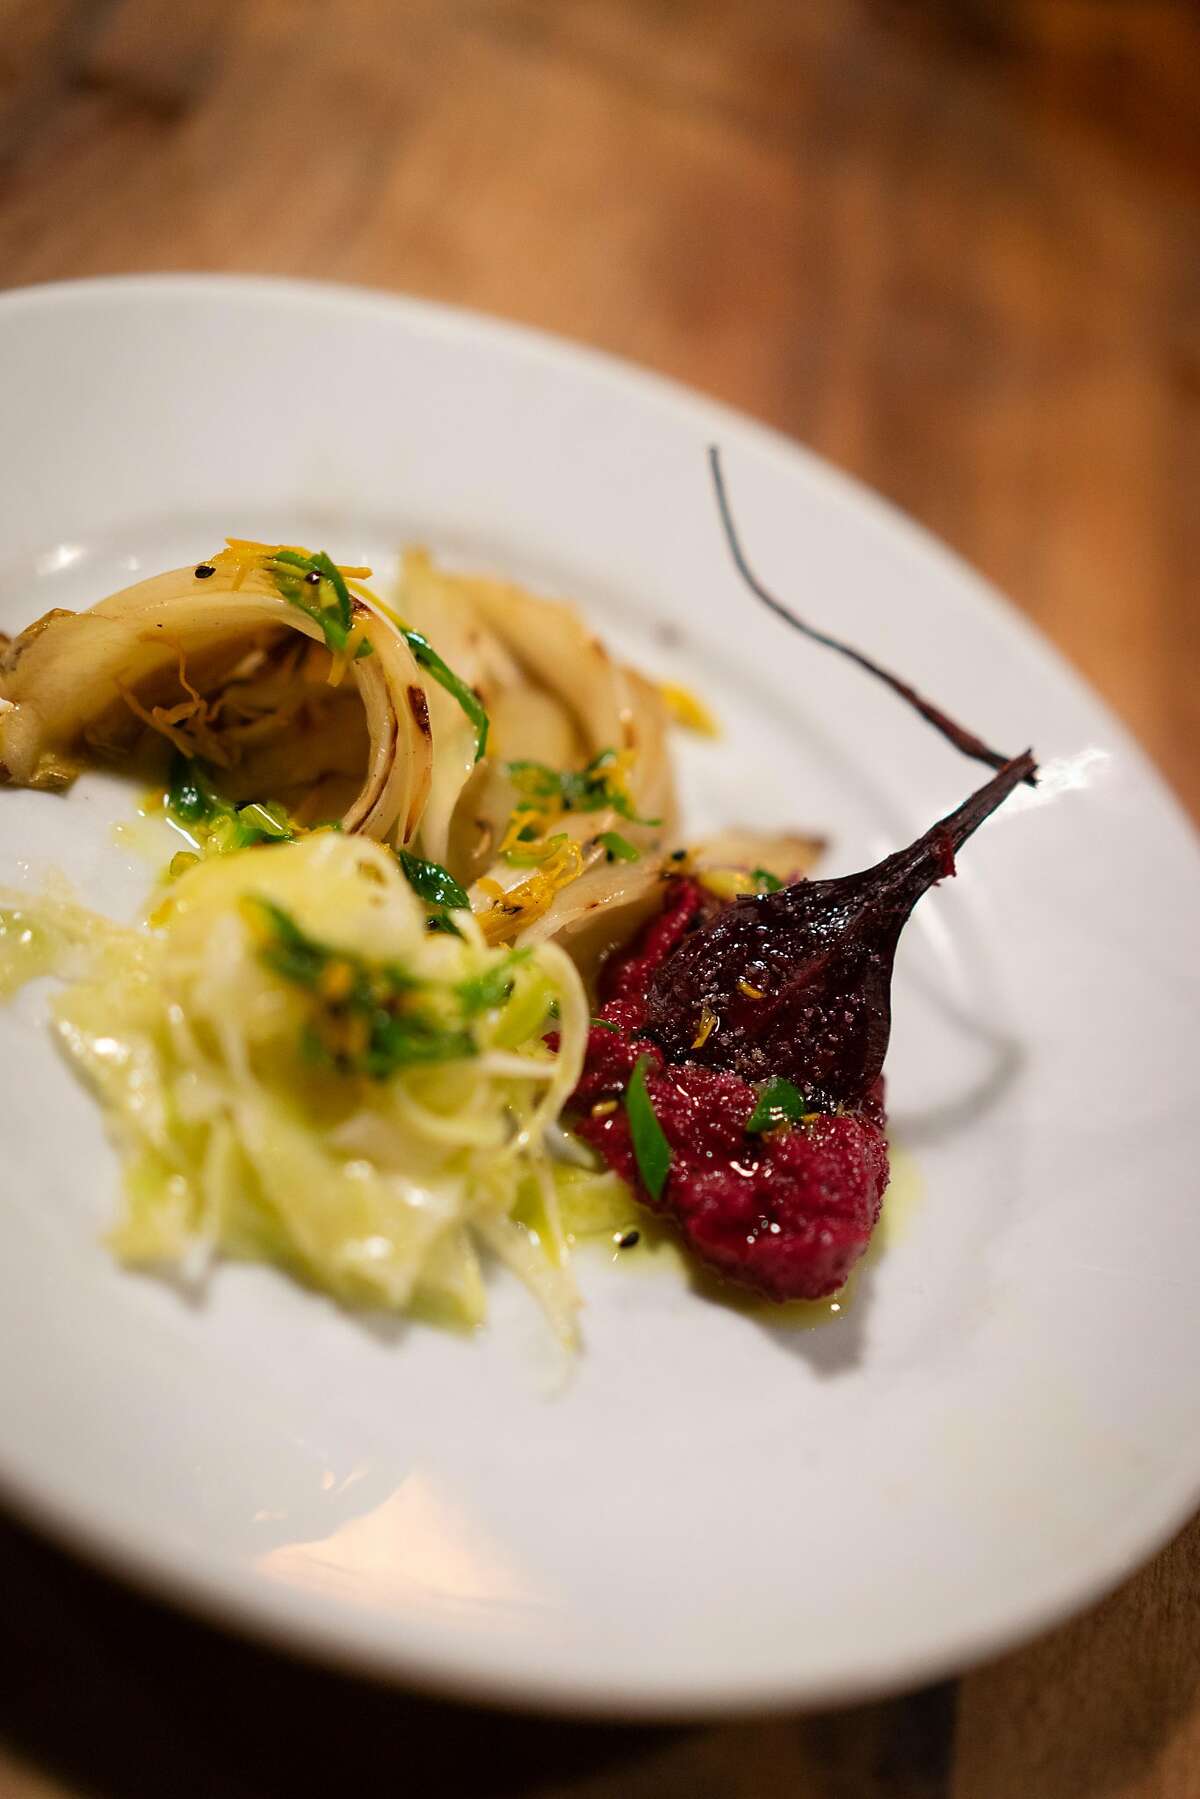 Beet, grilled Belgian endive and fennel salad with fresh turmeric is served as a first course at Camino restaurant in Oakland, Calif., on Friday, Dec. 7, 2018.